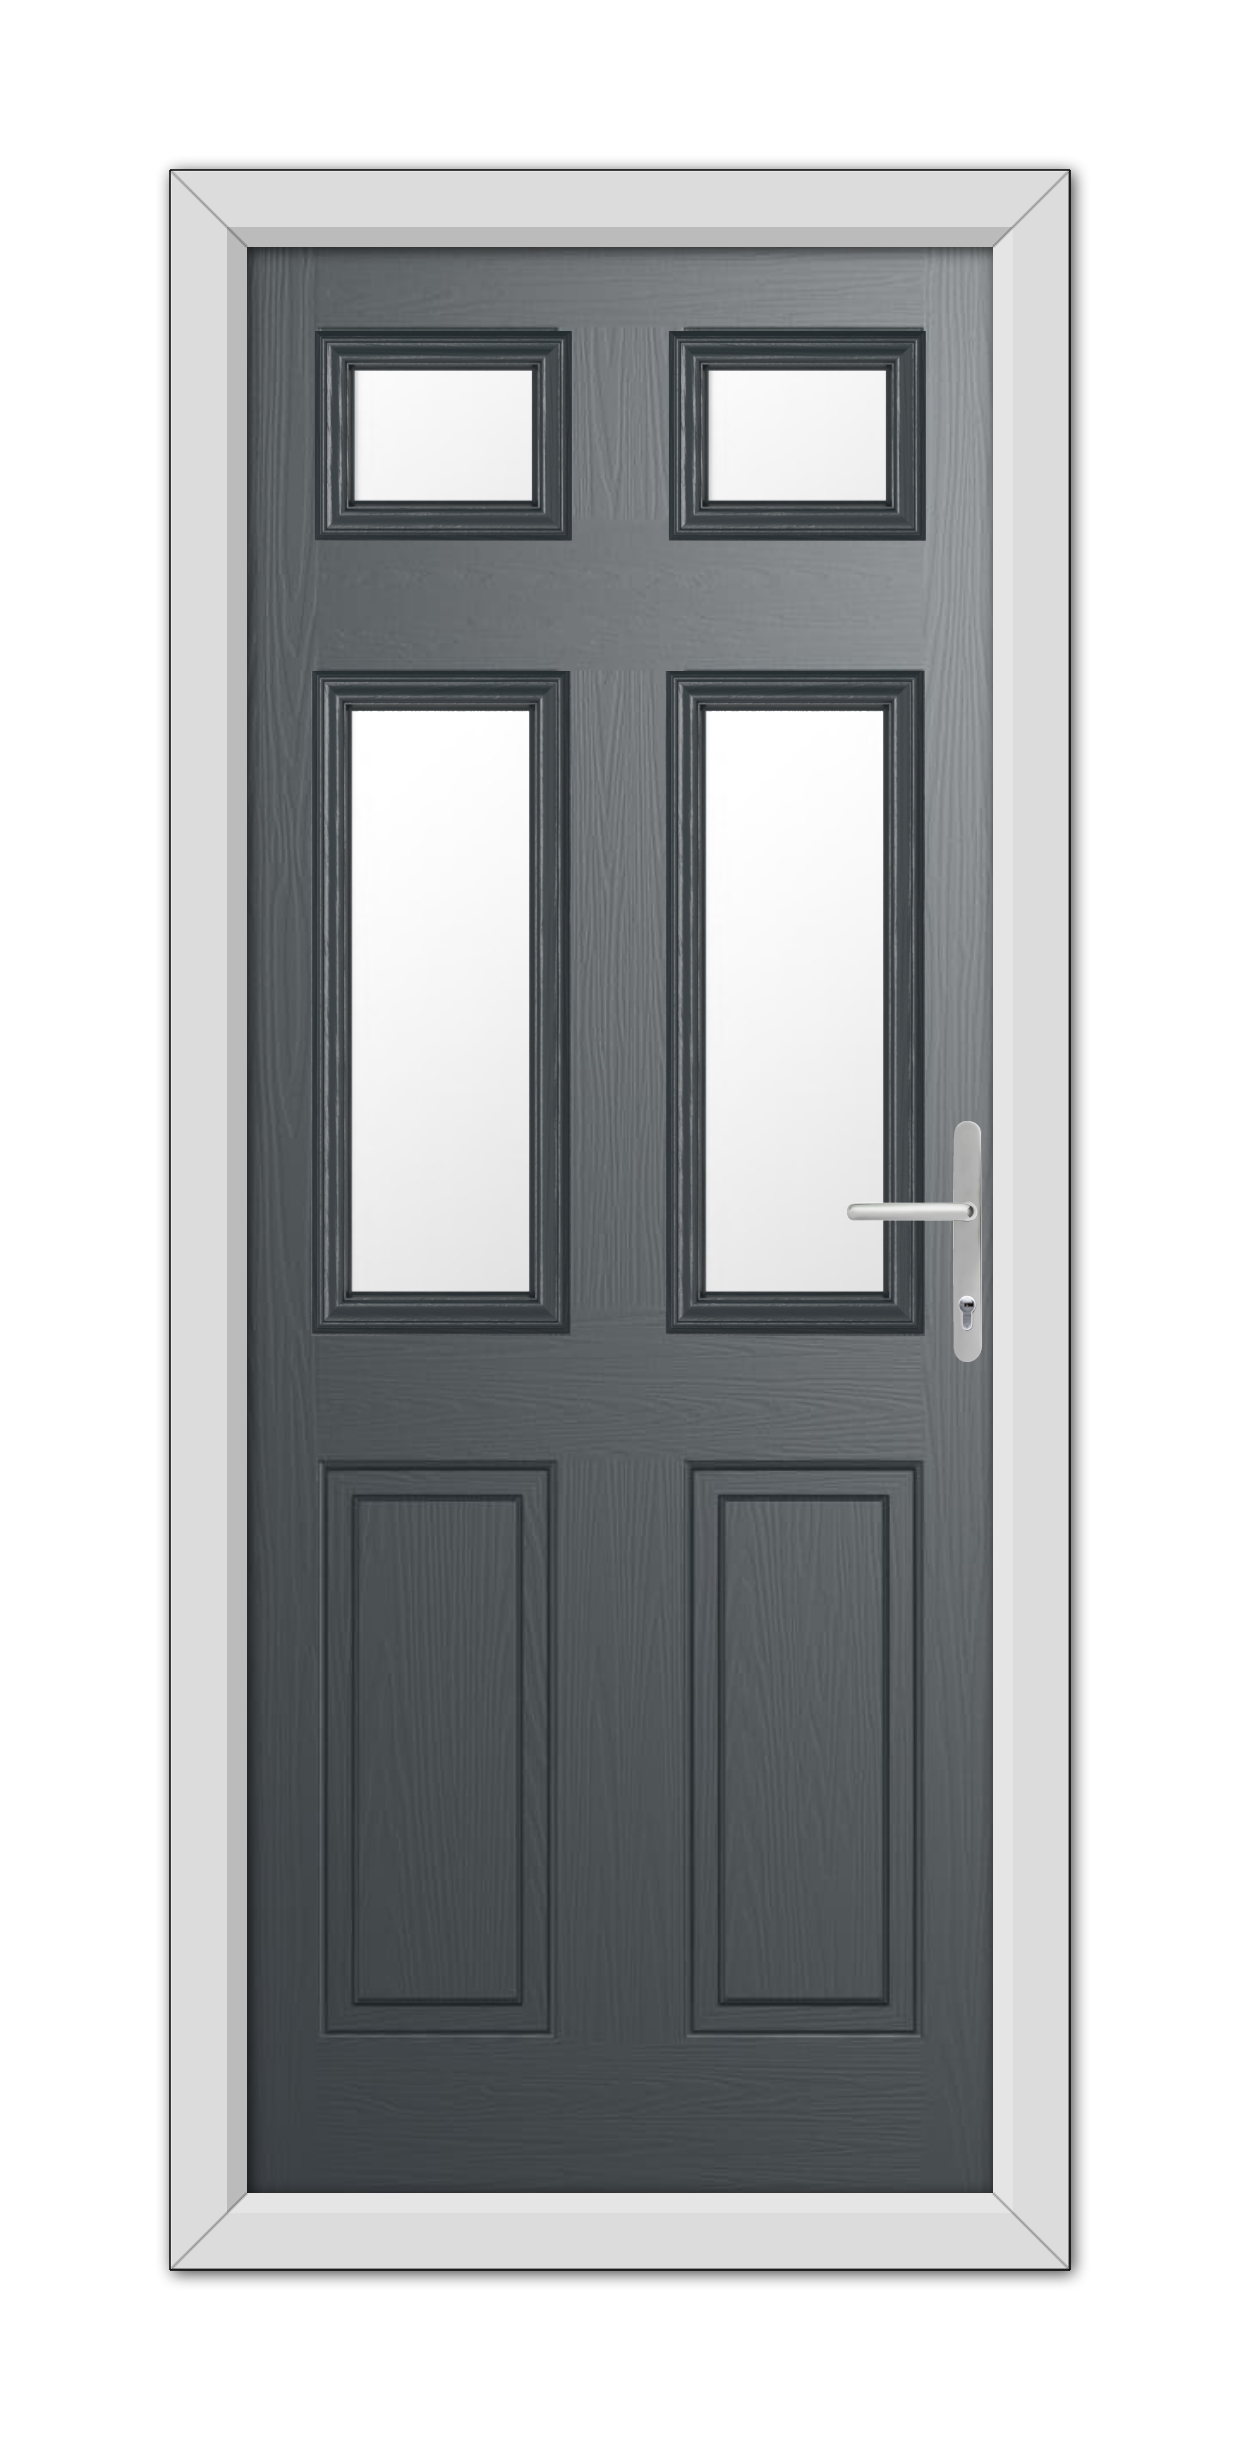 A modern Anthracite Grey Middleton Glazed 4 Composite Door 48mm Timber Core featuring a vertical handle, four rectangular panels, and three small windows.